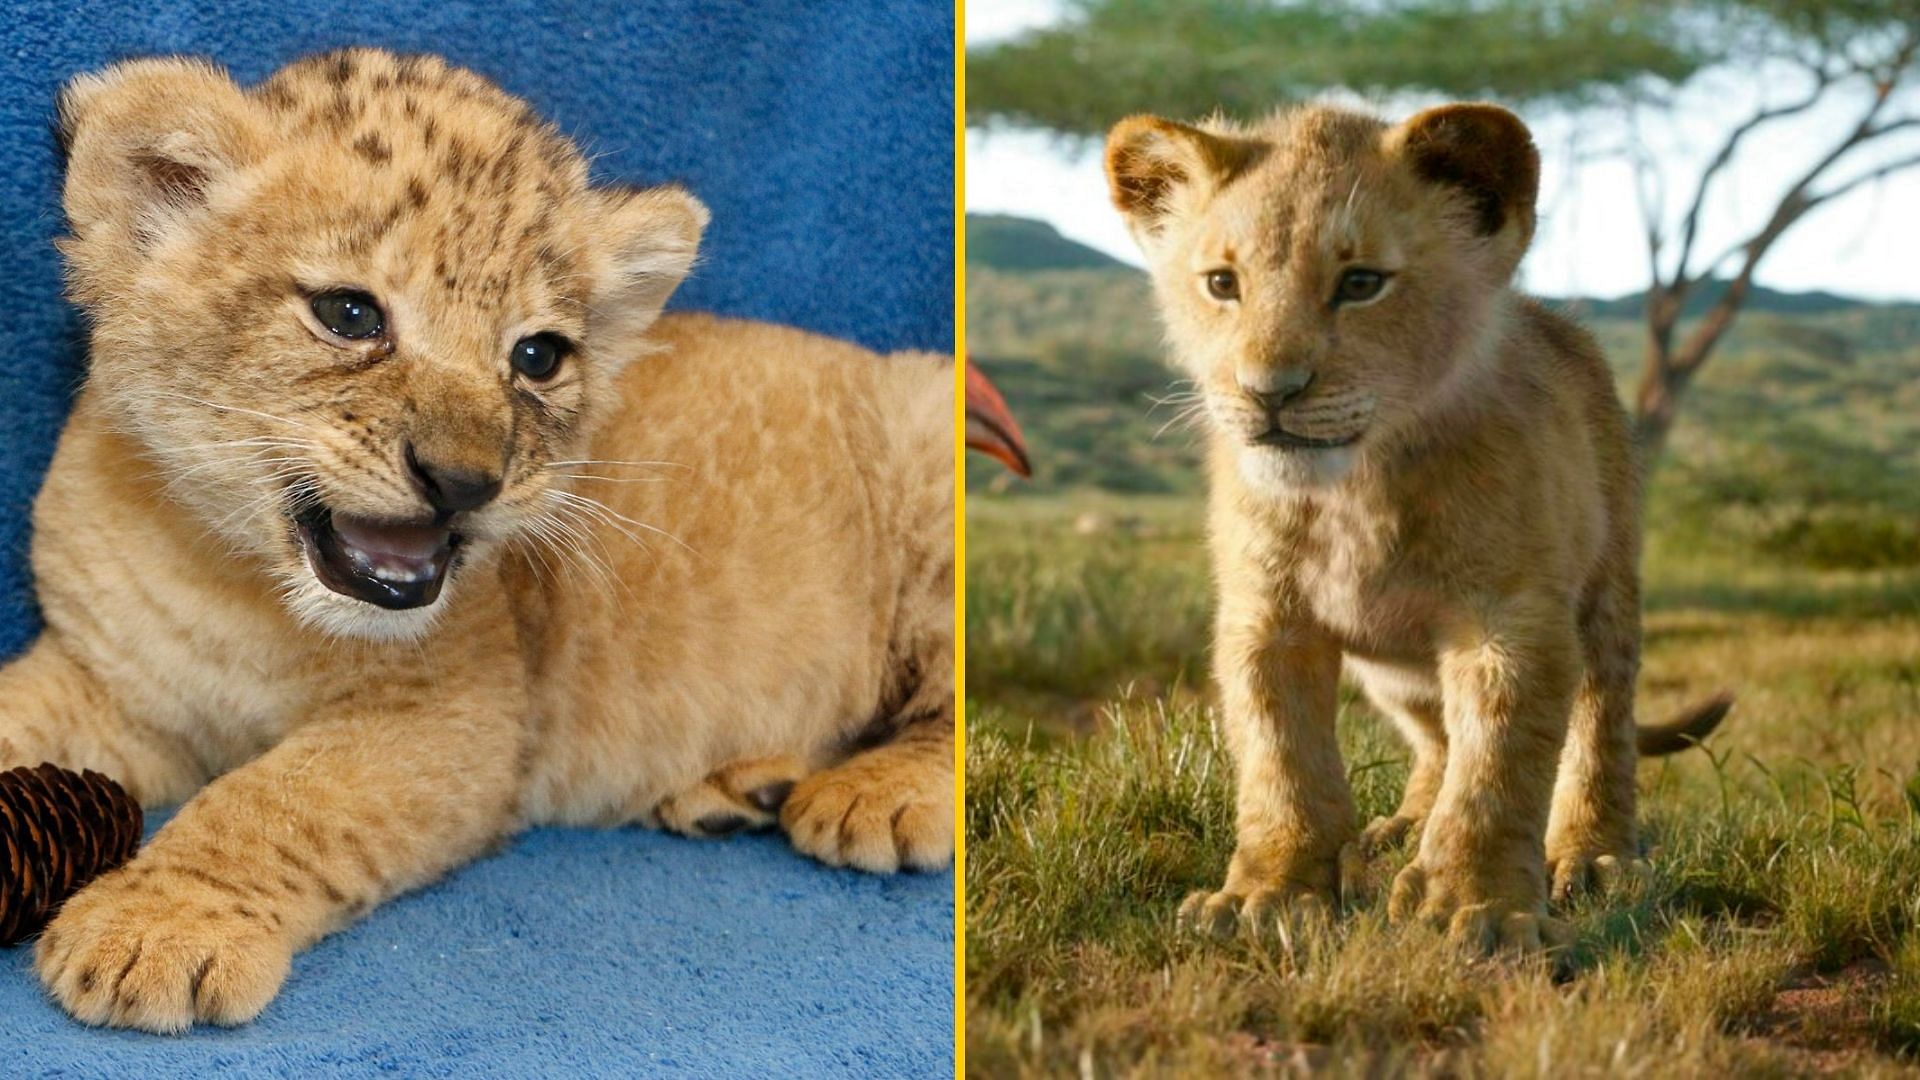 Behati, a lion cub at the Dallas Zoo, inspired the CGI version of Simba in the 2019 remake of <i>The Lion King</i>.